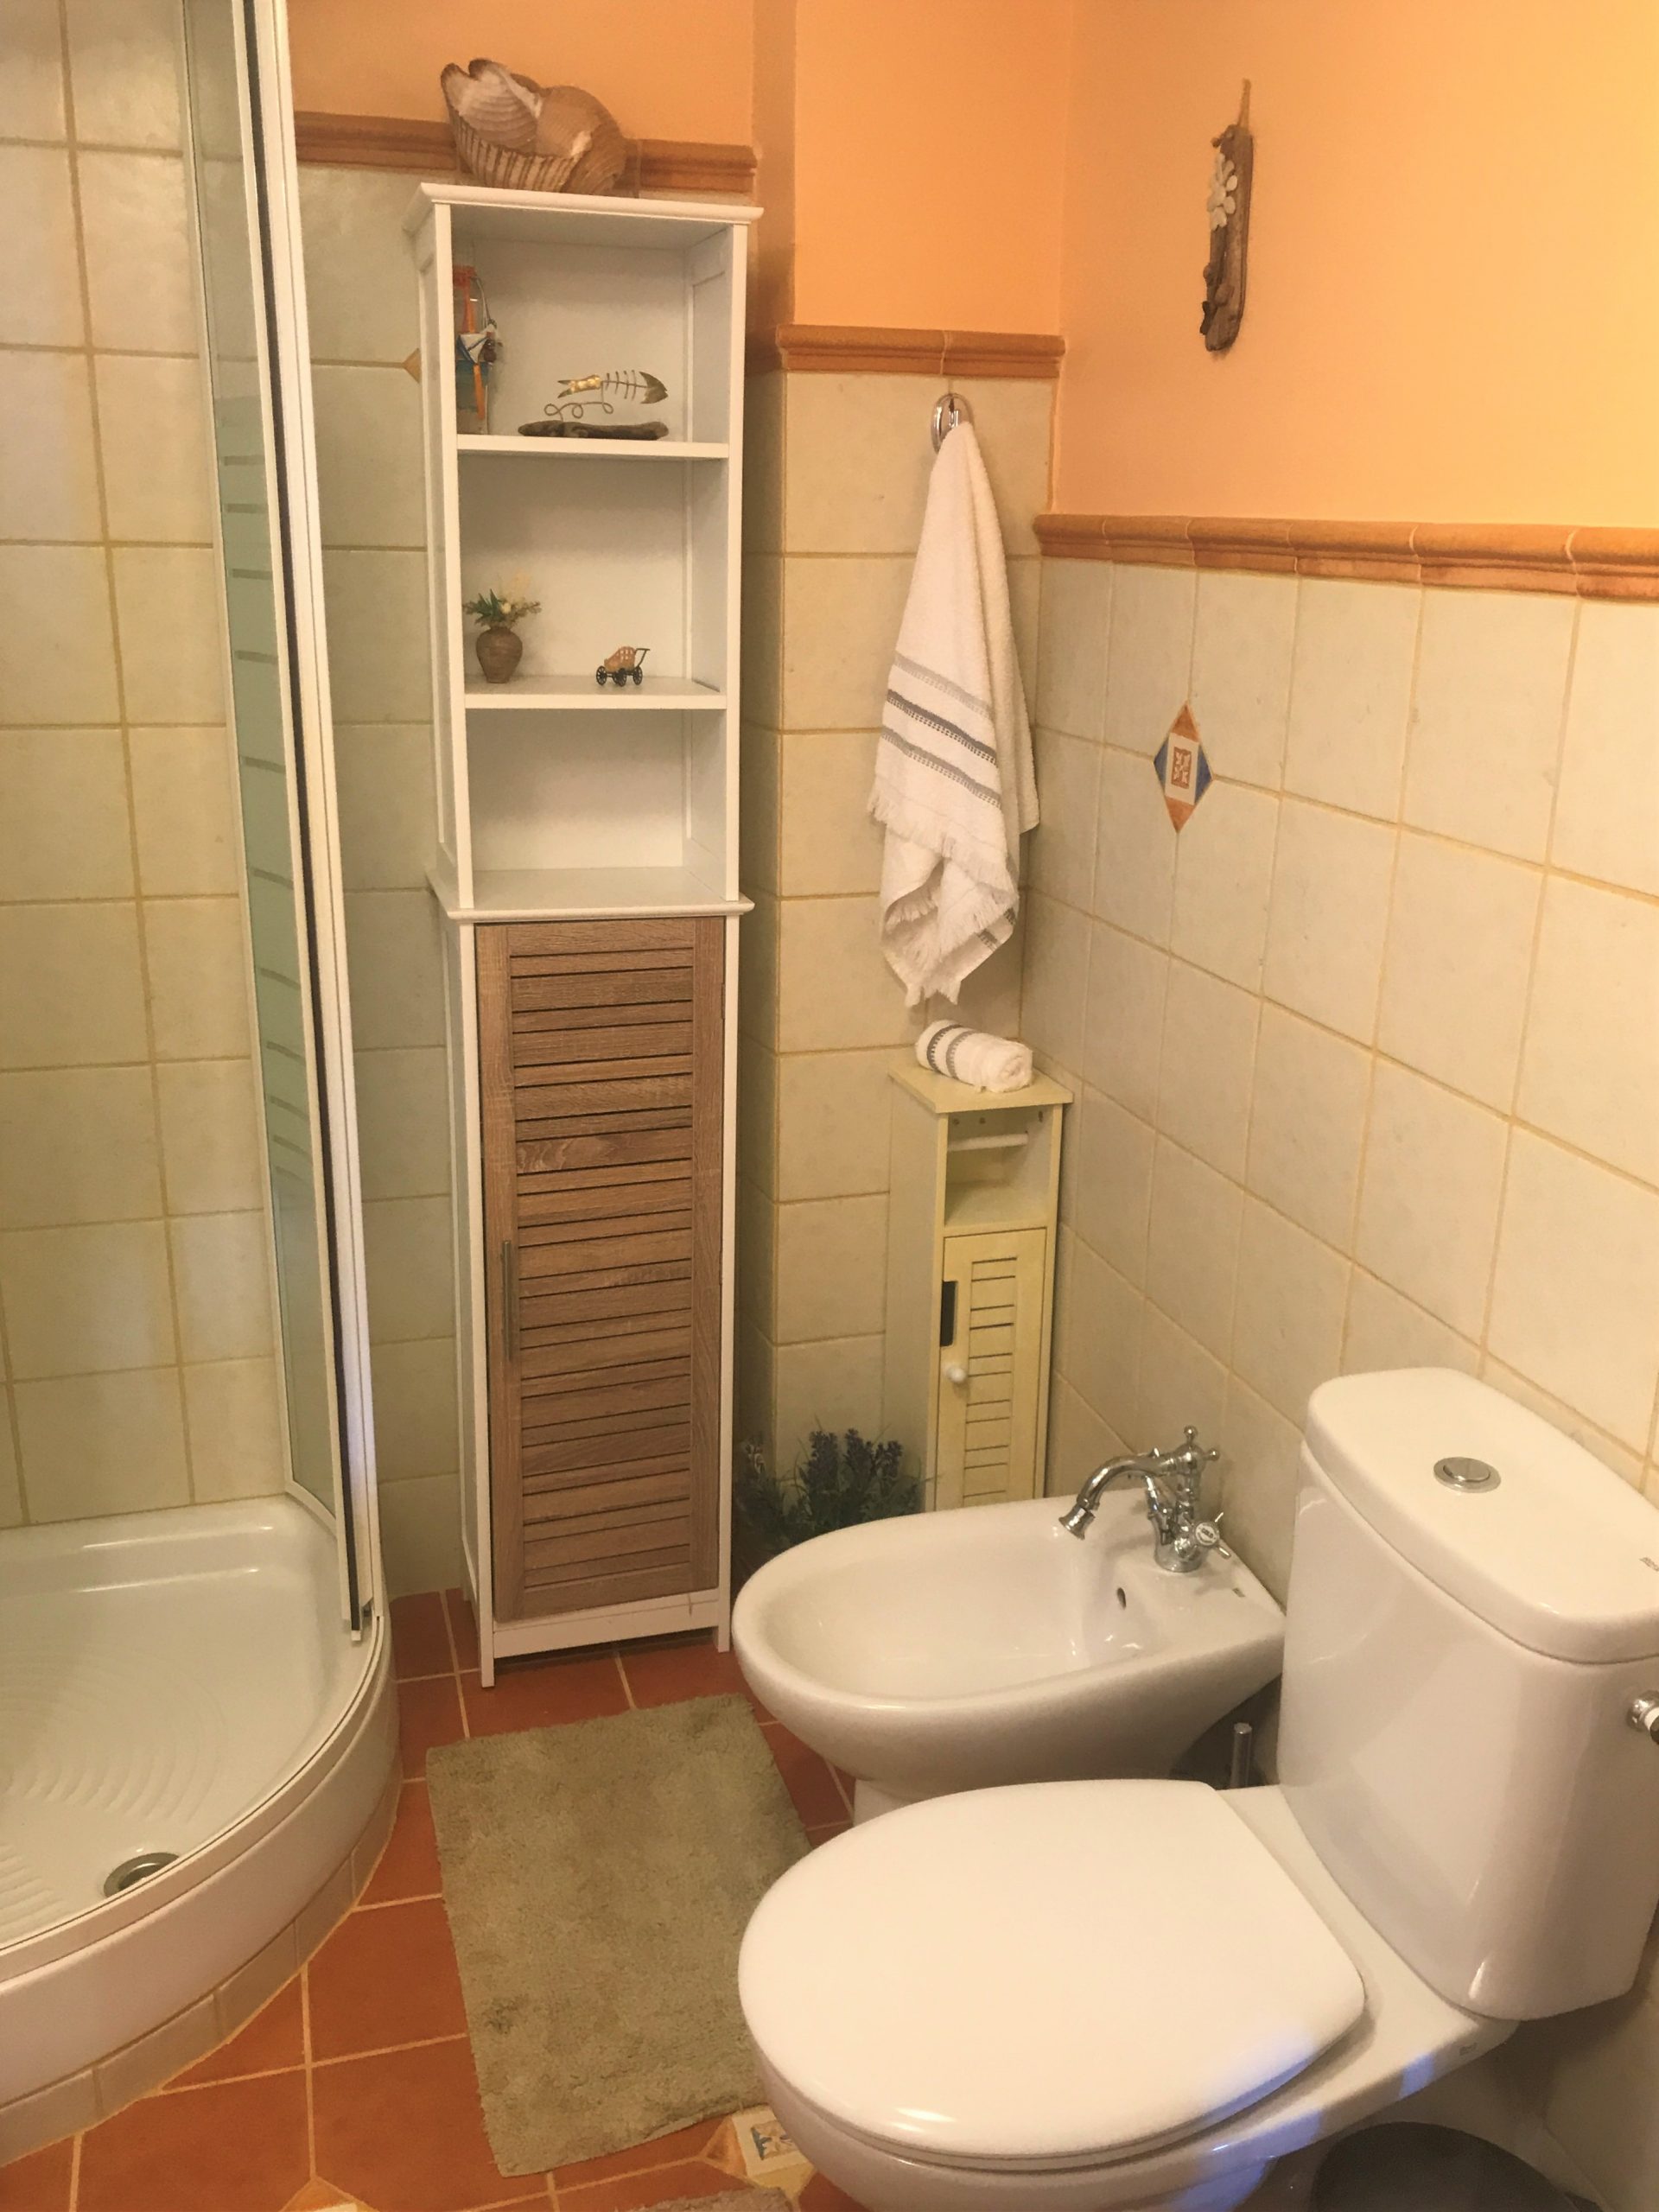 Bathroom of house for rent on Ithaca Greece, Anoghi